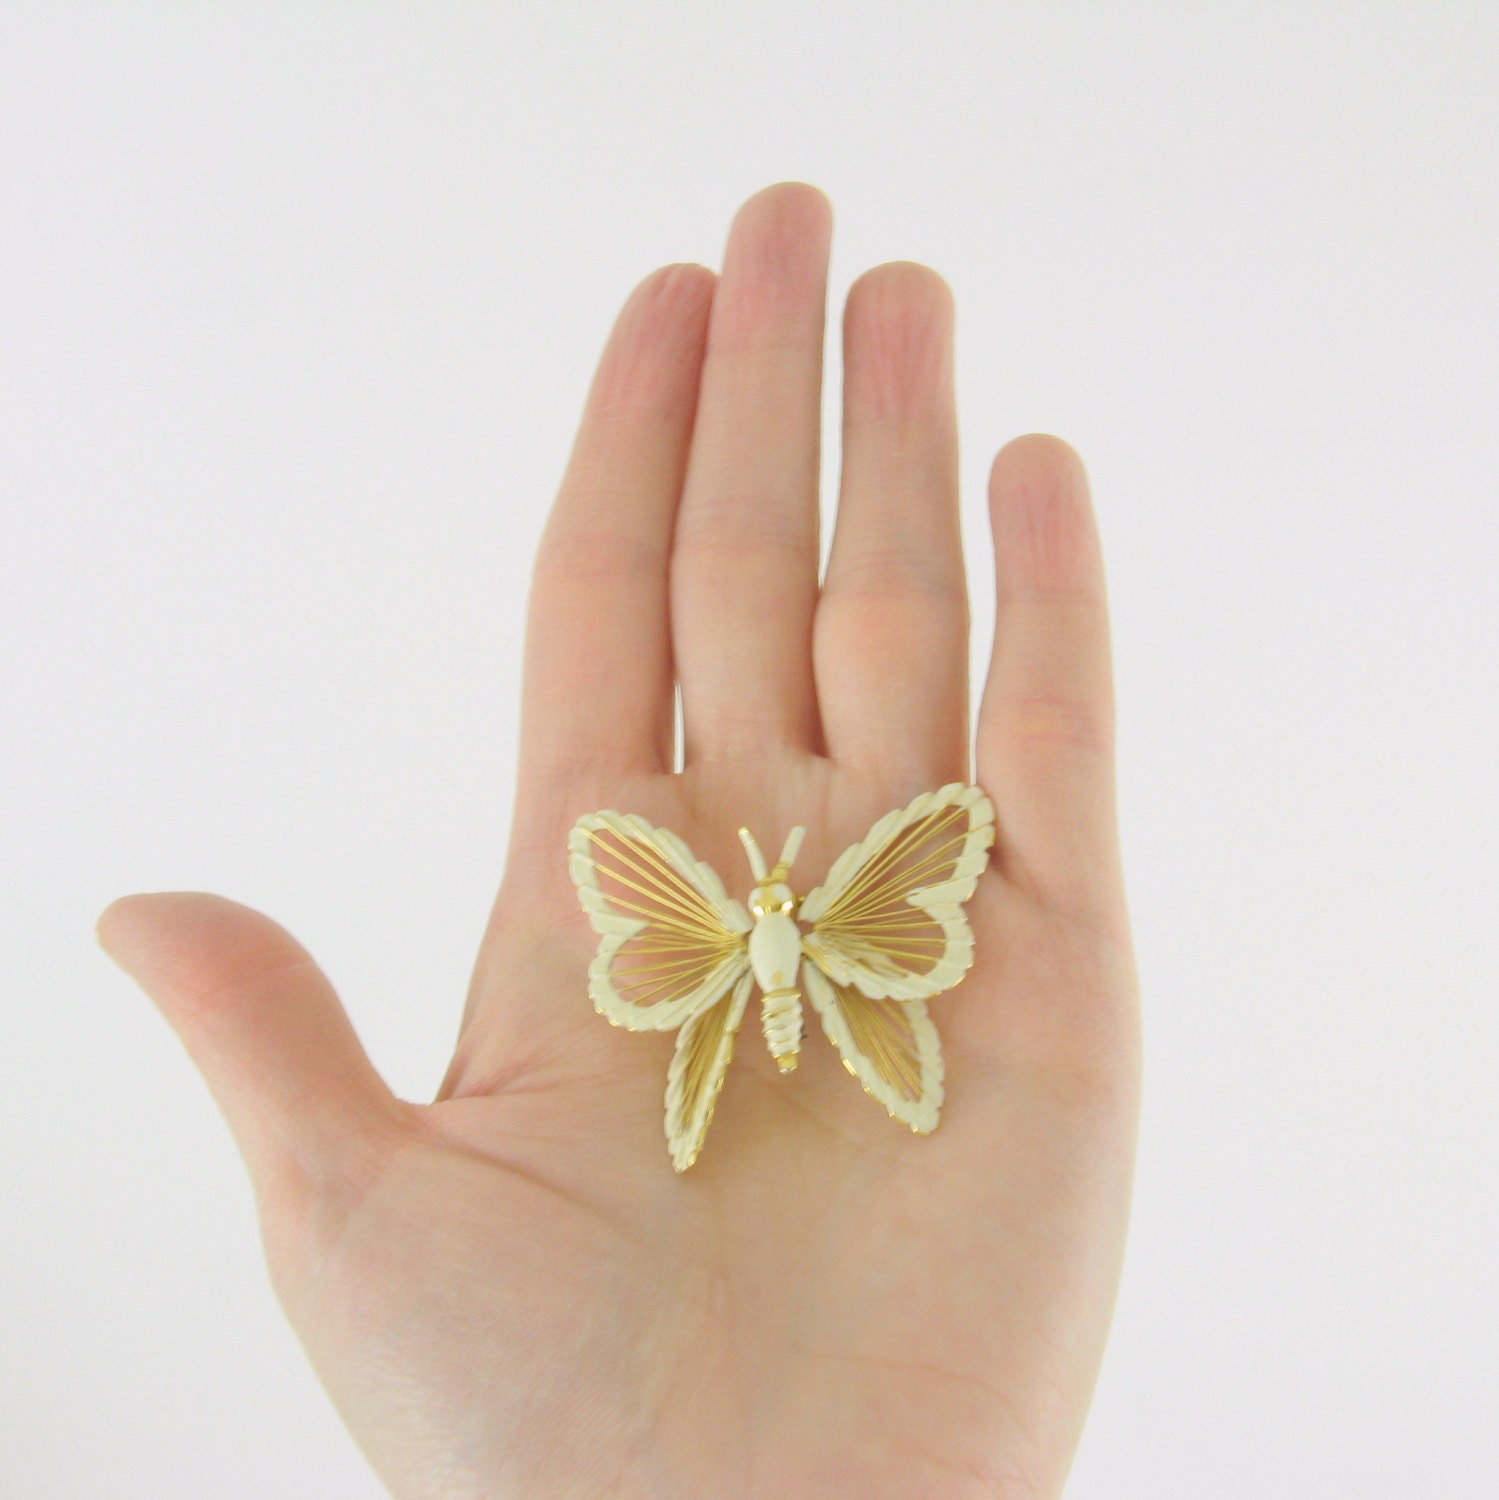 Vintage Monet Butterfly Brooch - 1960s Gold and Cream Enamel - TwoMoxie